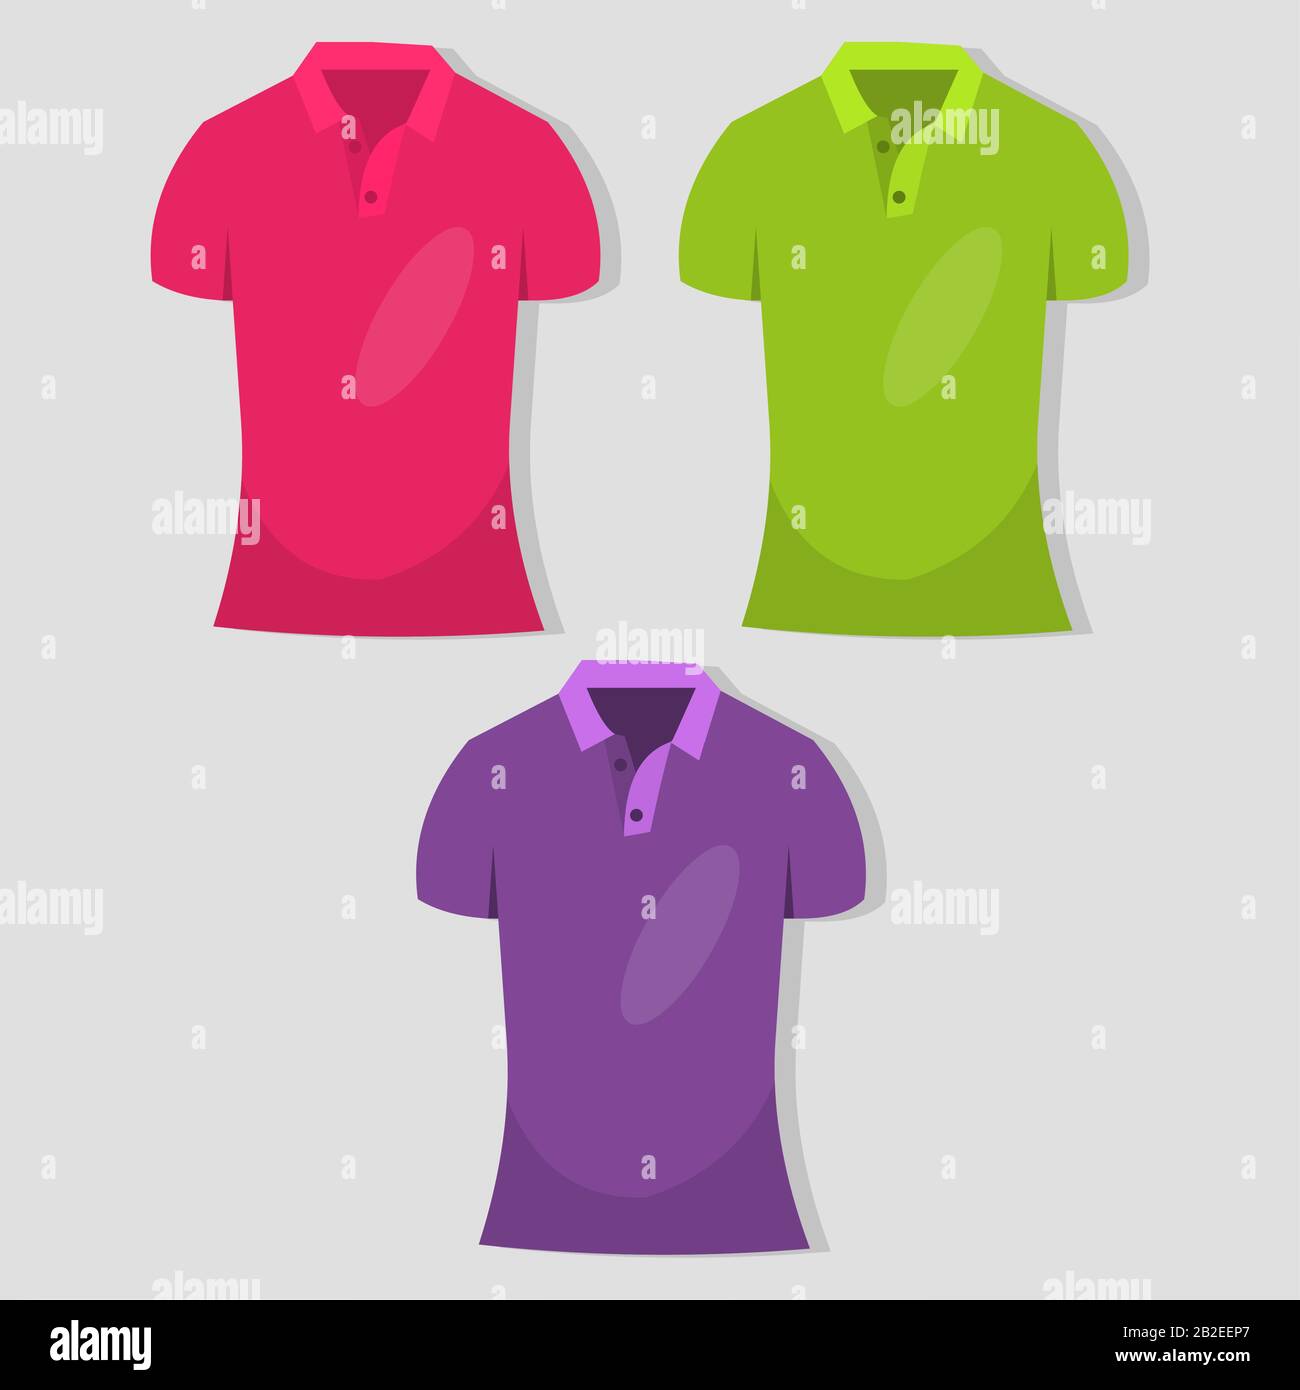 Polo t shirts Stock Vector Images - Alamy